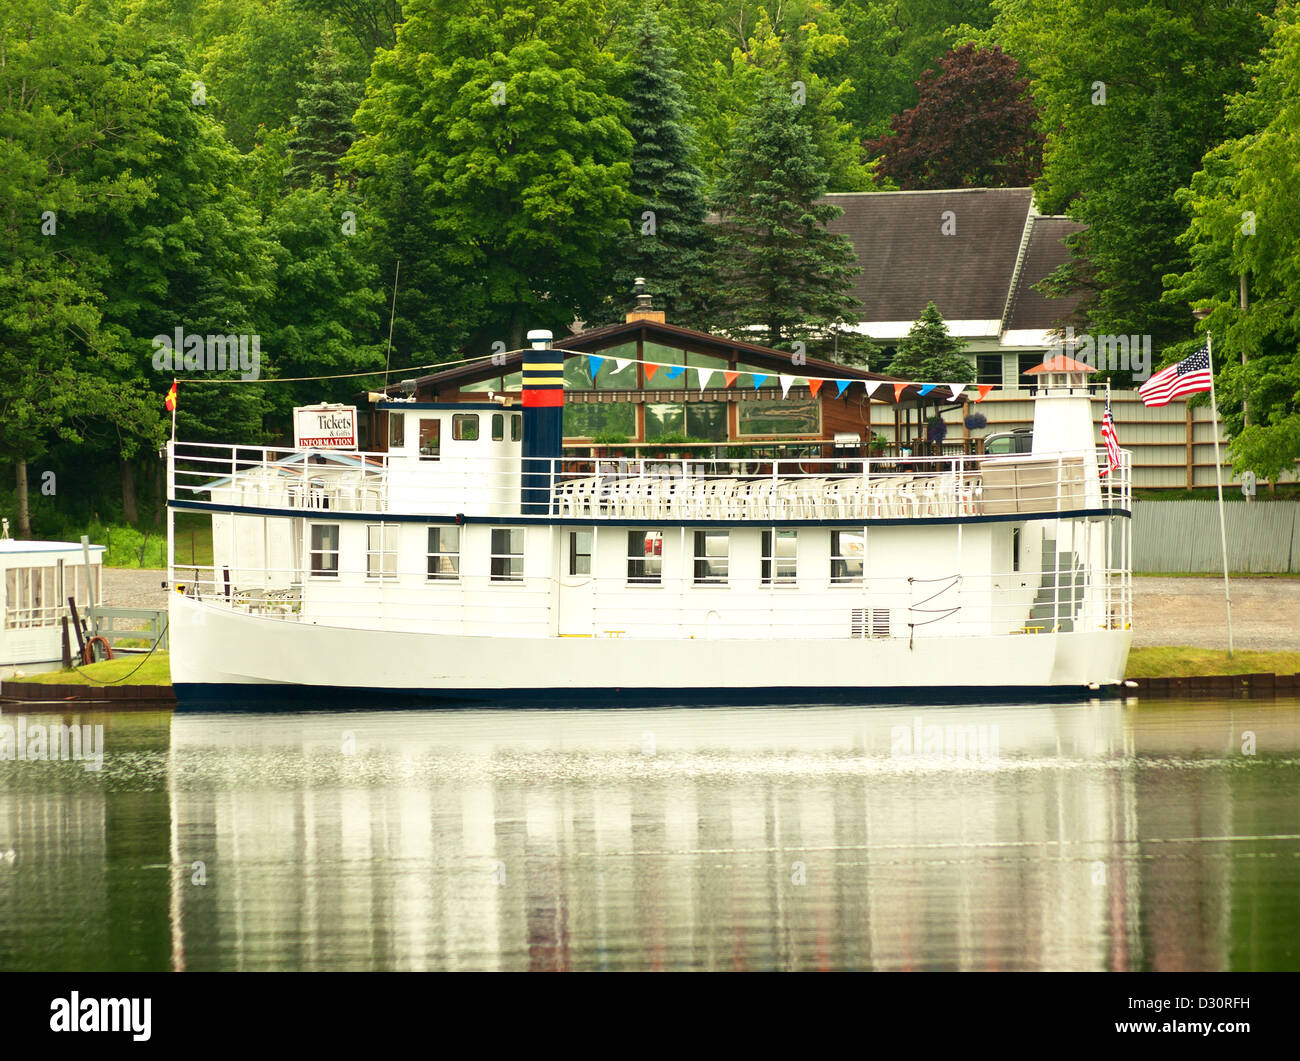 boat used for tours and sight-seeing in the Adirondack mountains, New York Stock Photo